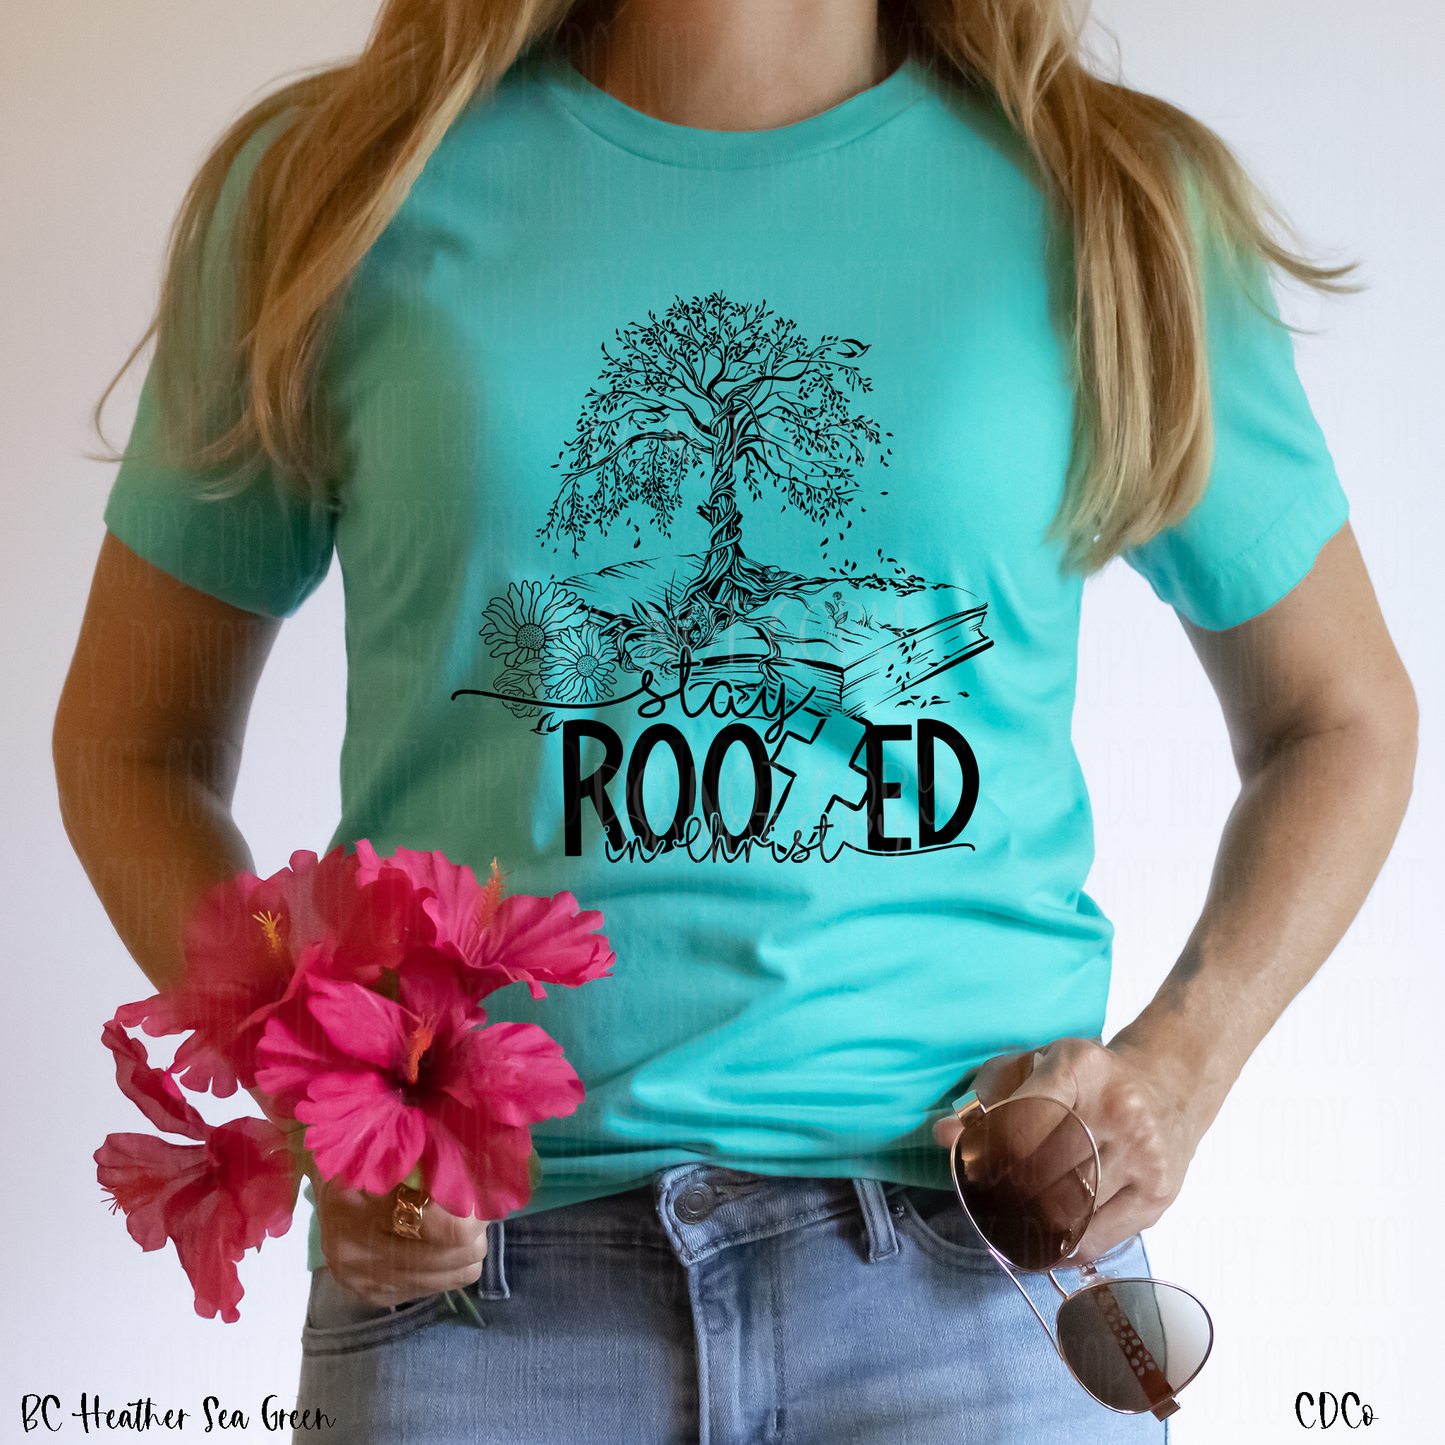 Stay Rooted in Christ (325°)